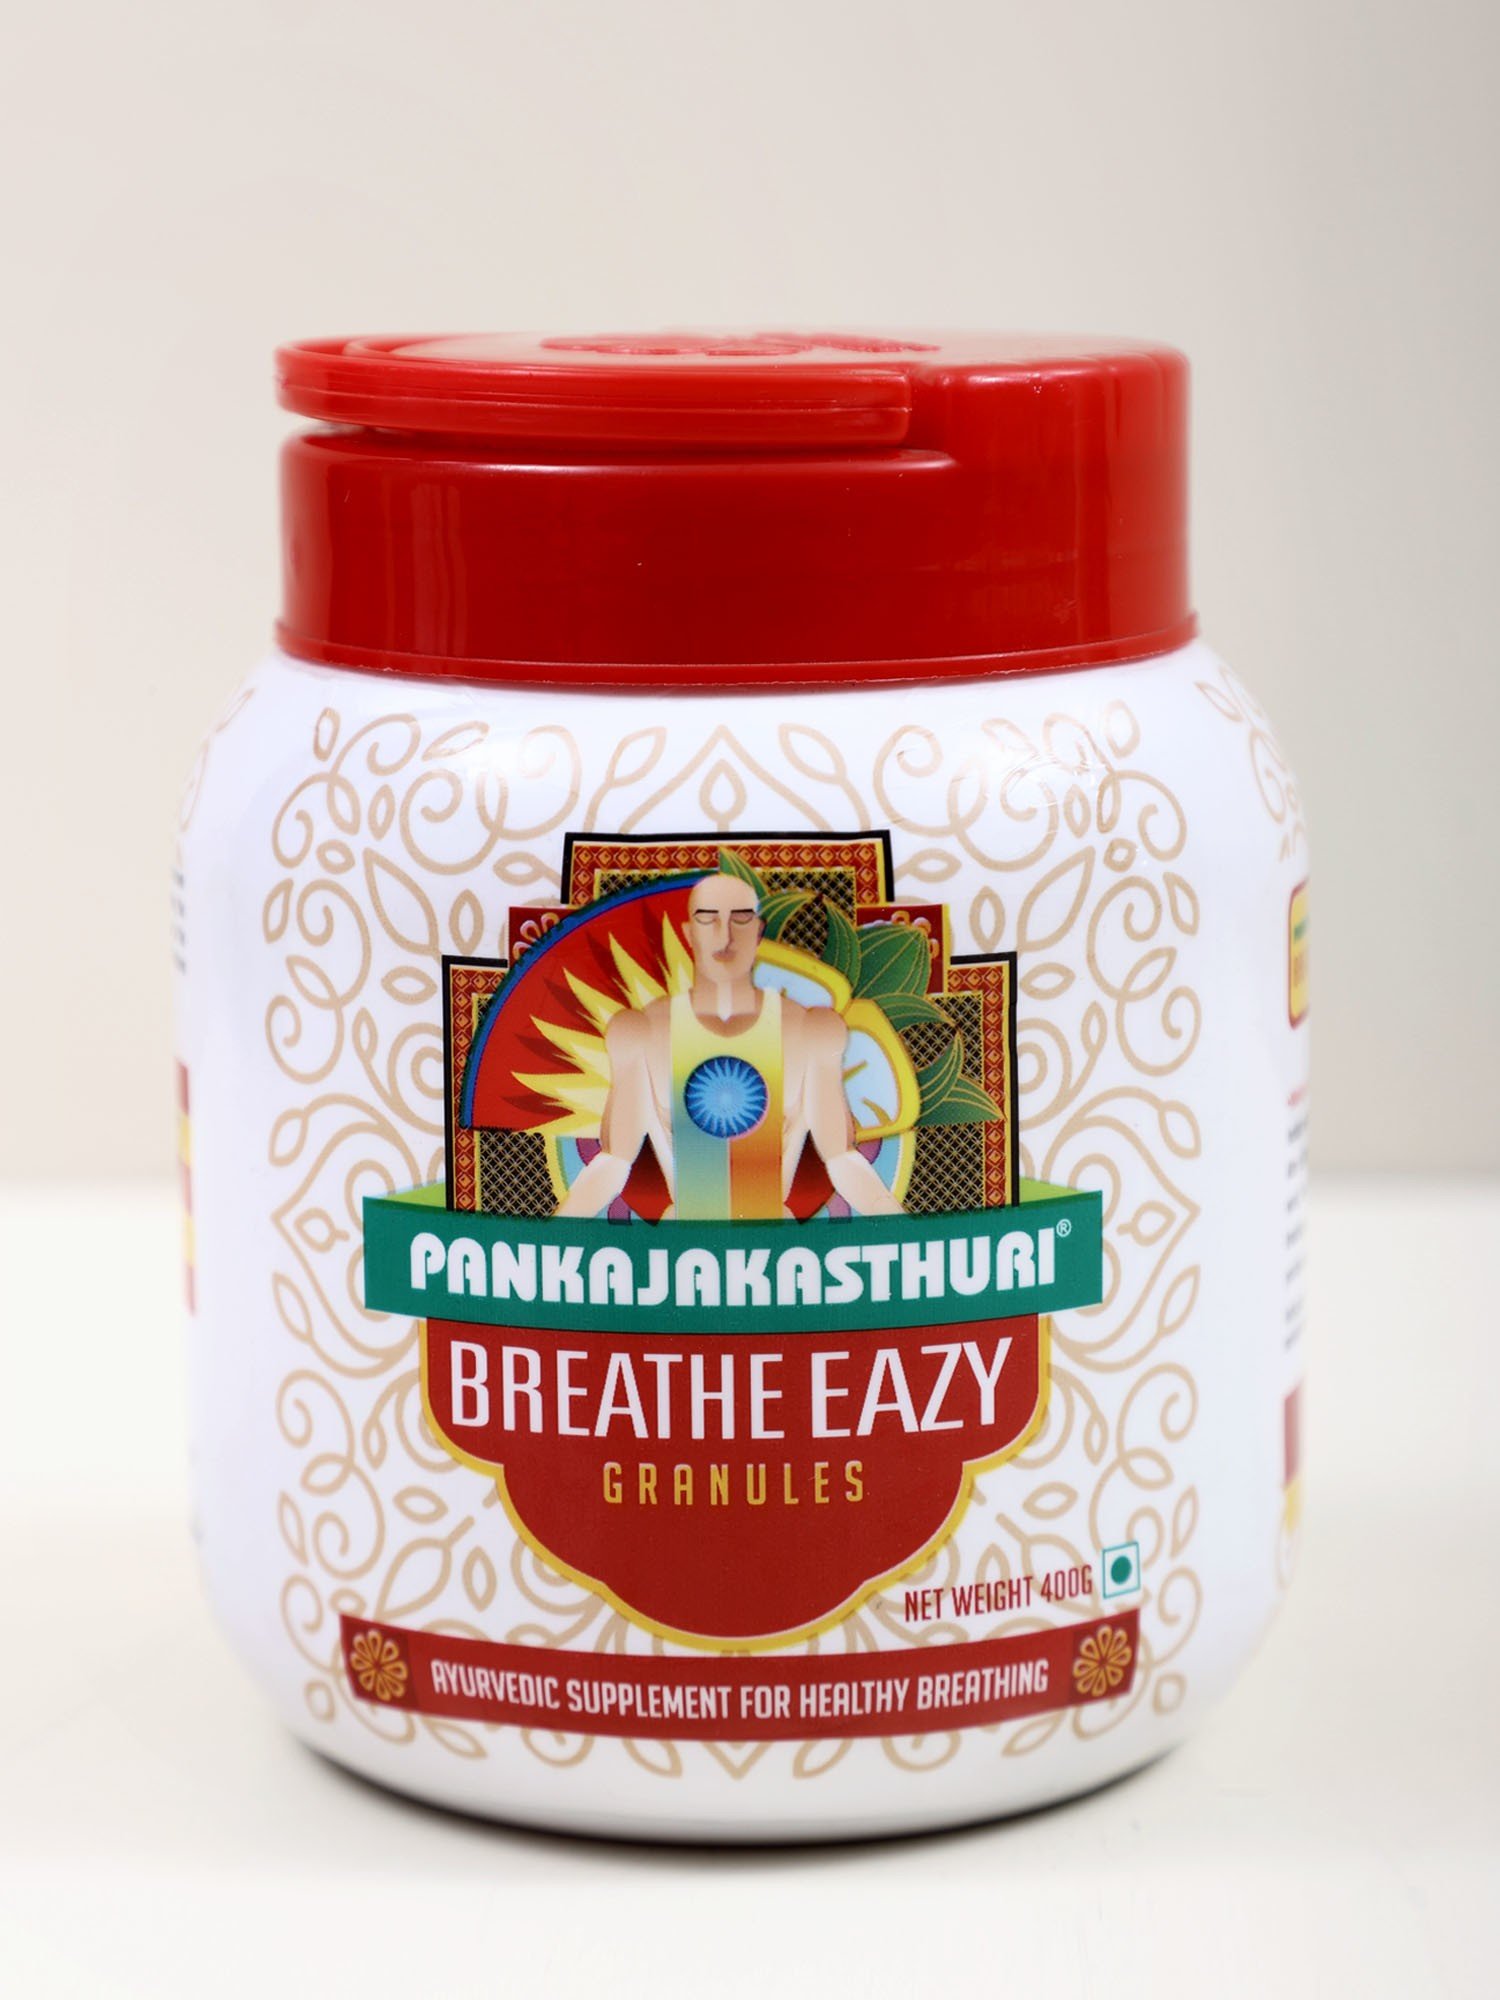 Breathe Eazy (Ayurvedic Supplement for Healthy Breathing) - book cover